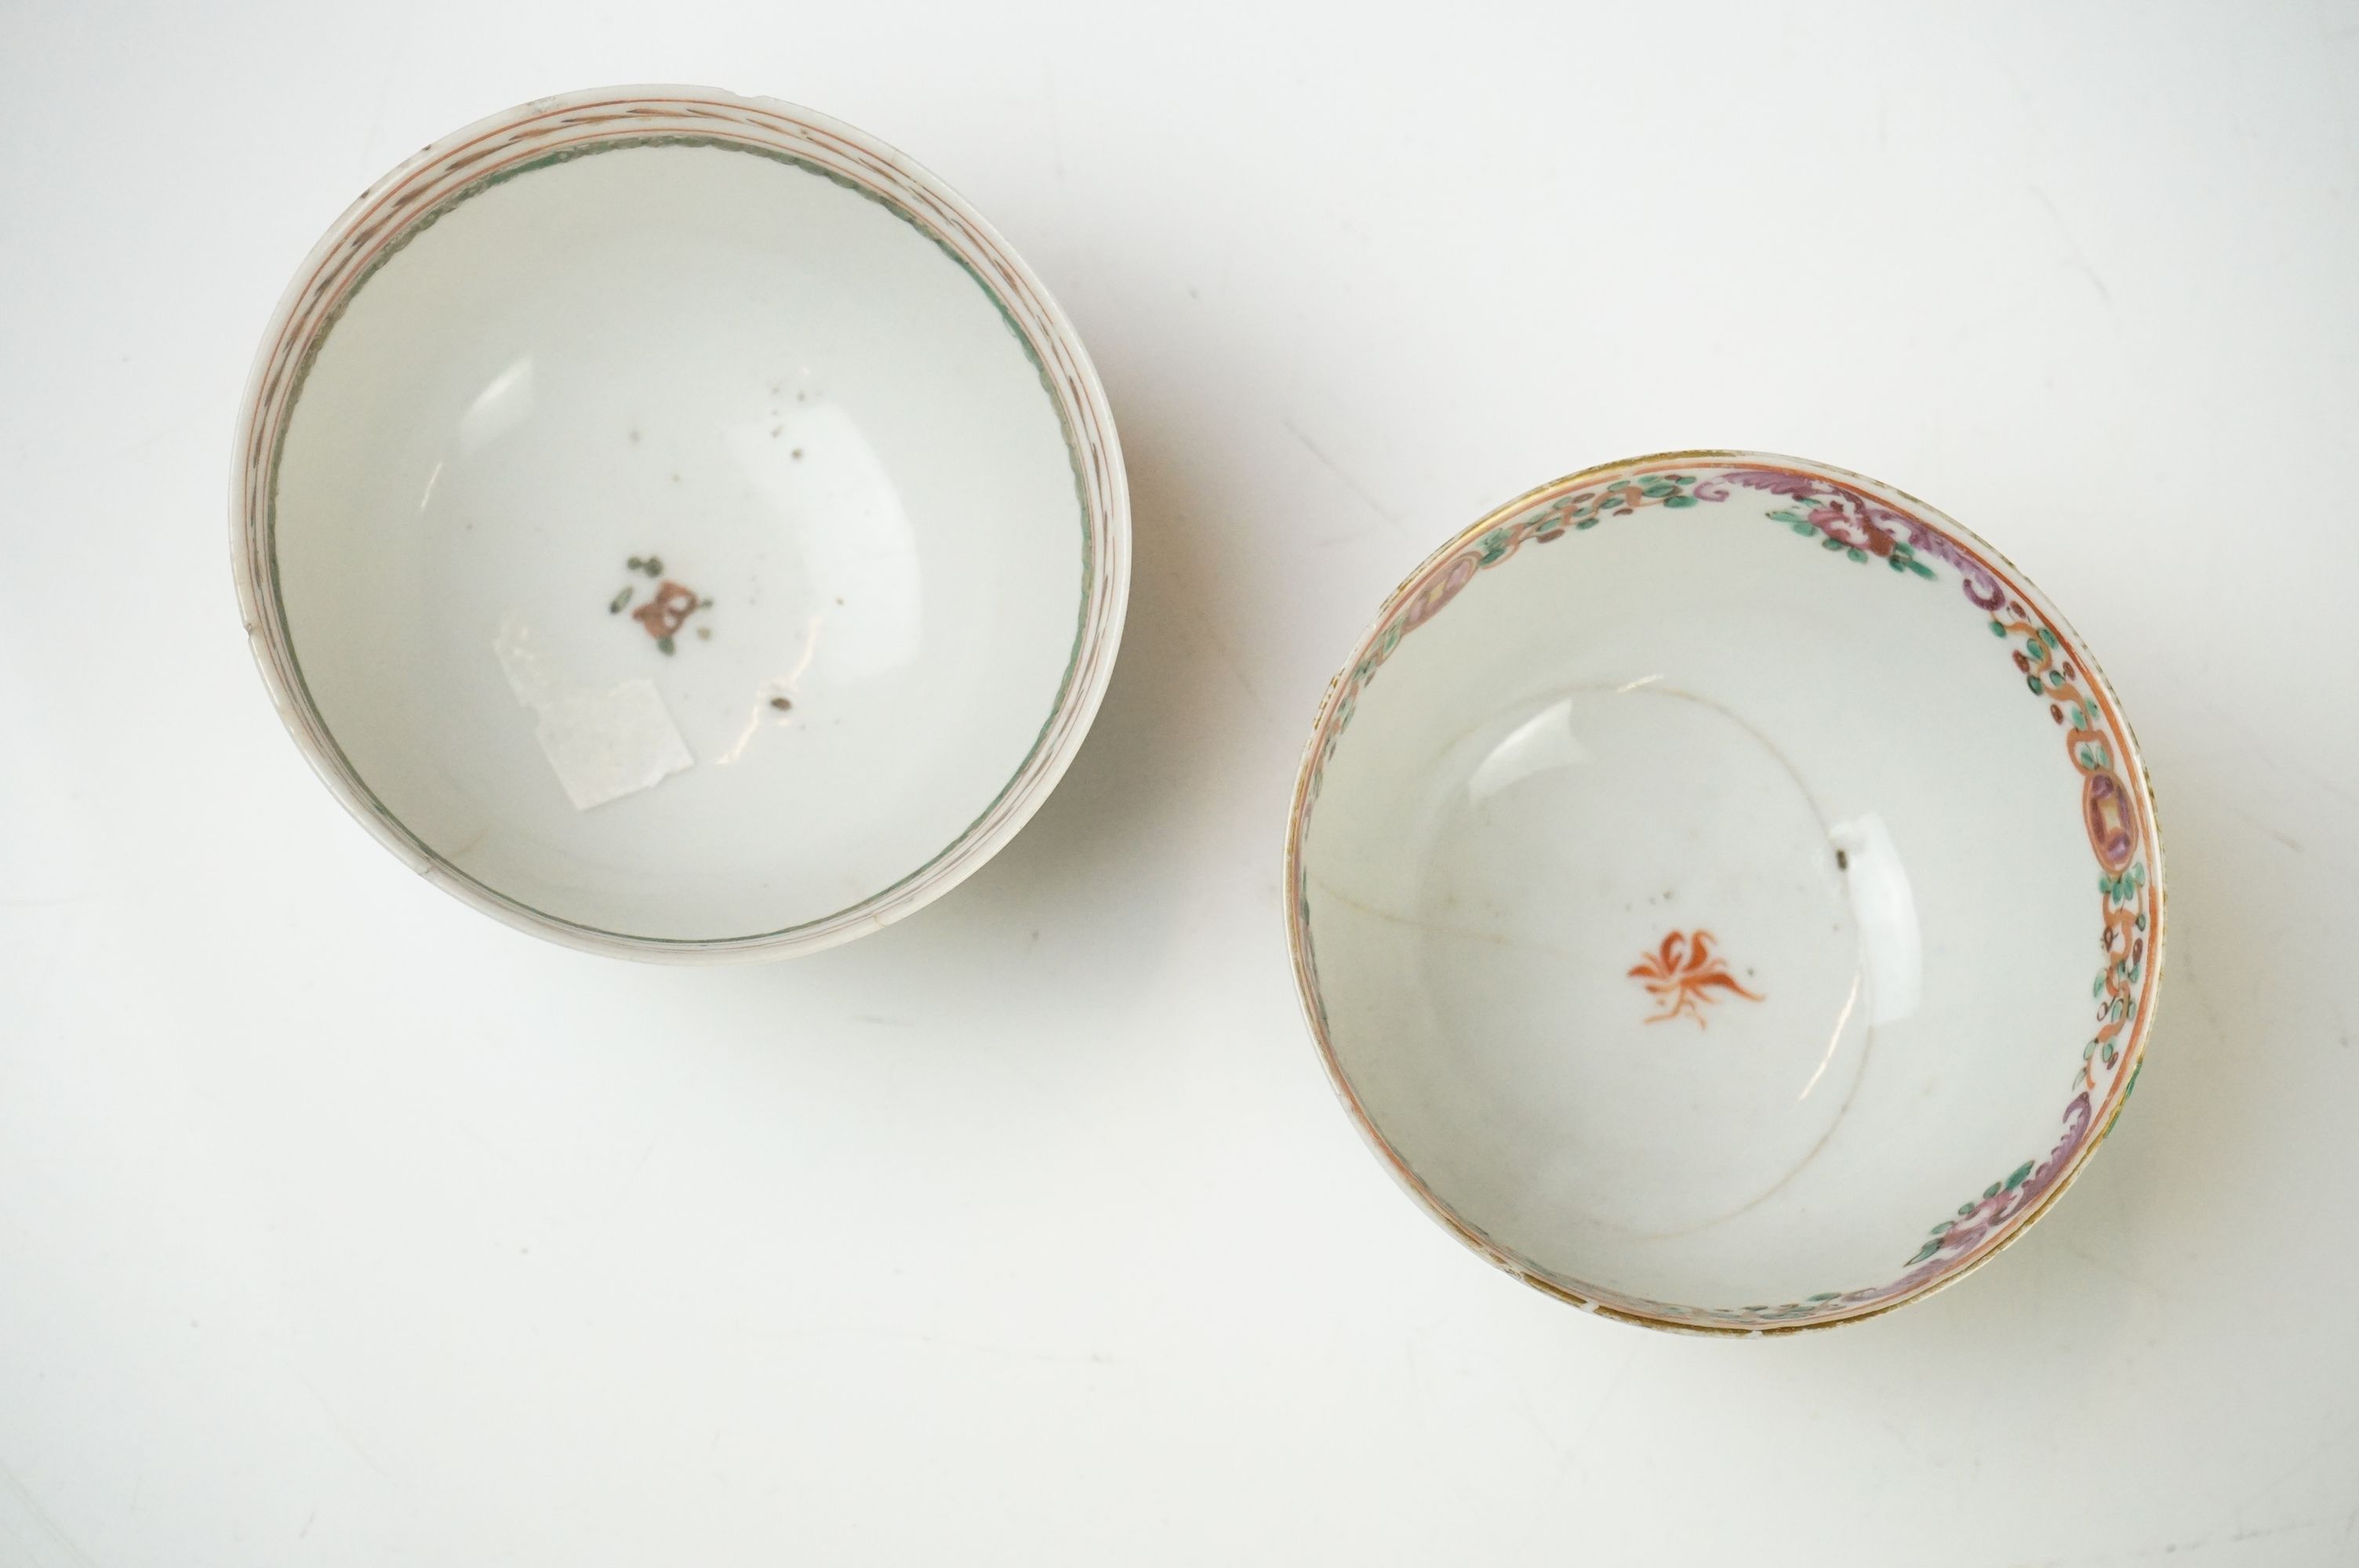 Collection of Chinese Tea Bowls, Cups and Saucers, 18th century onwards, mainly famille rose and - Image 14 of 28